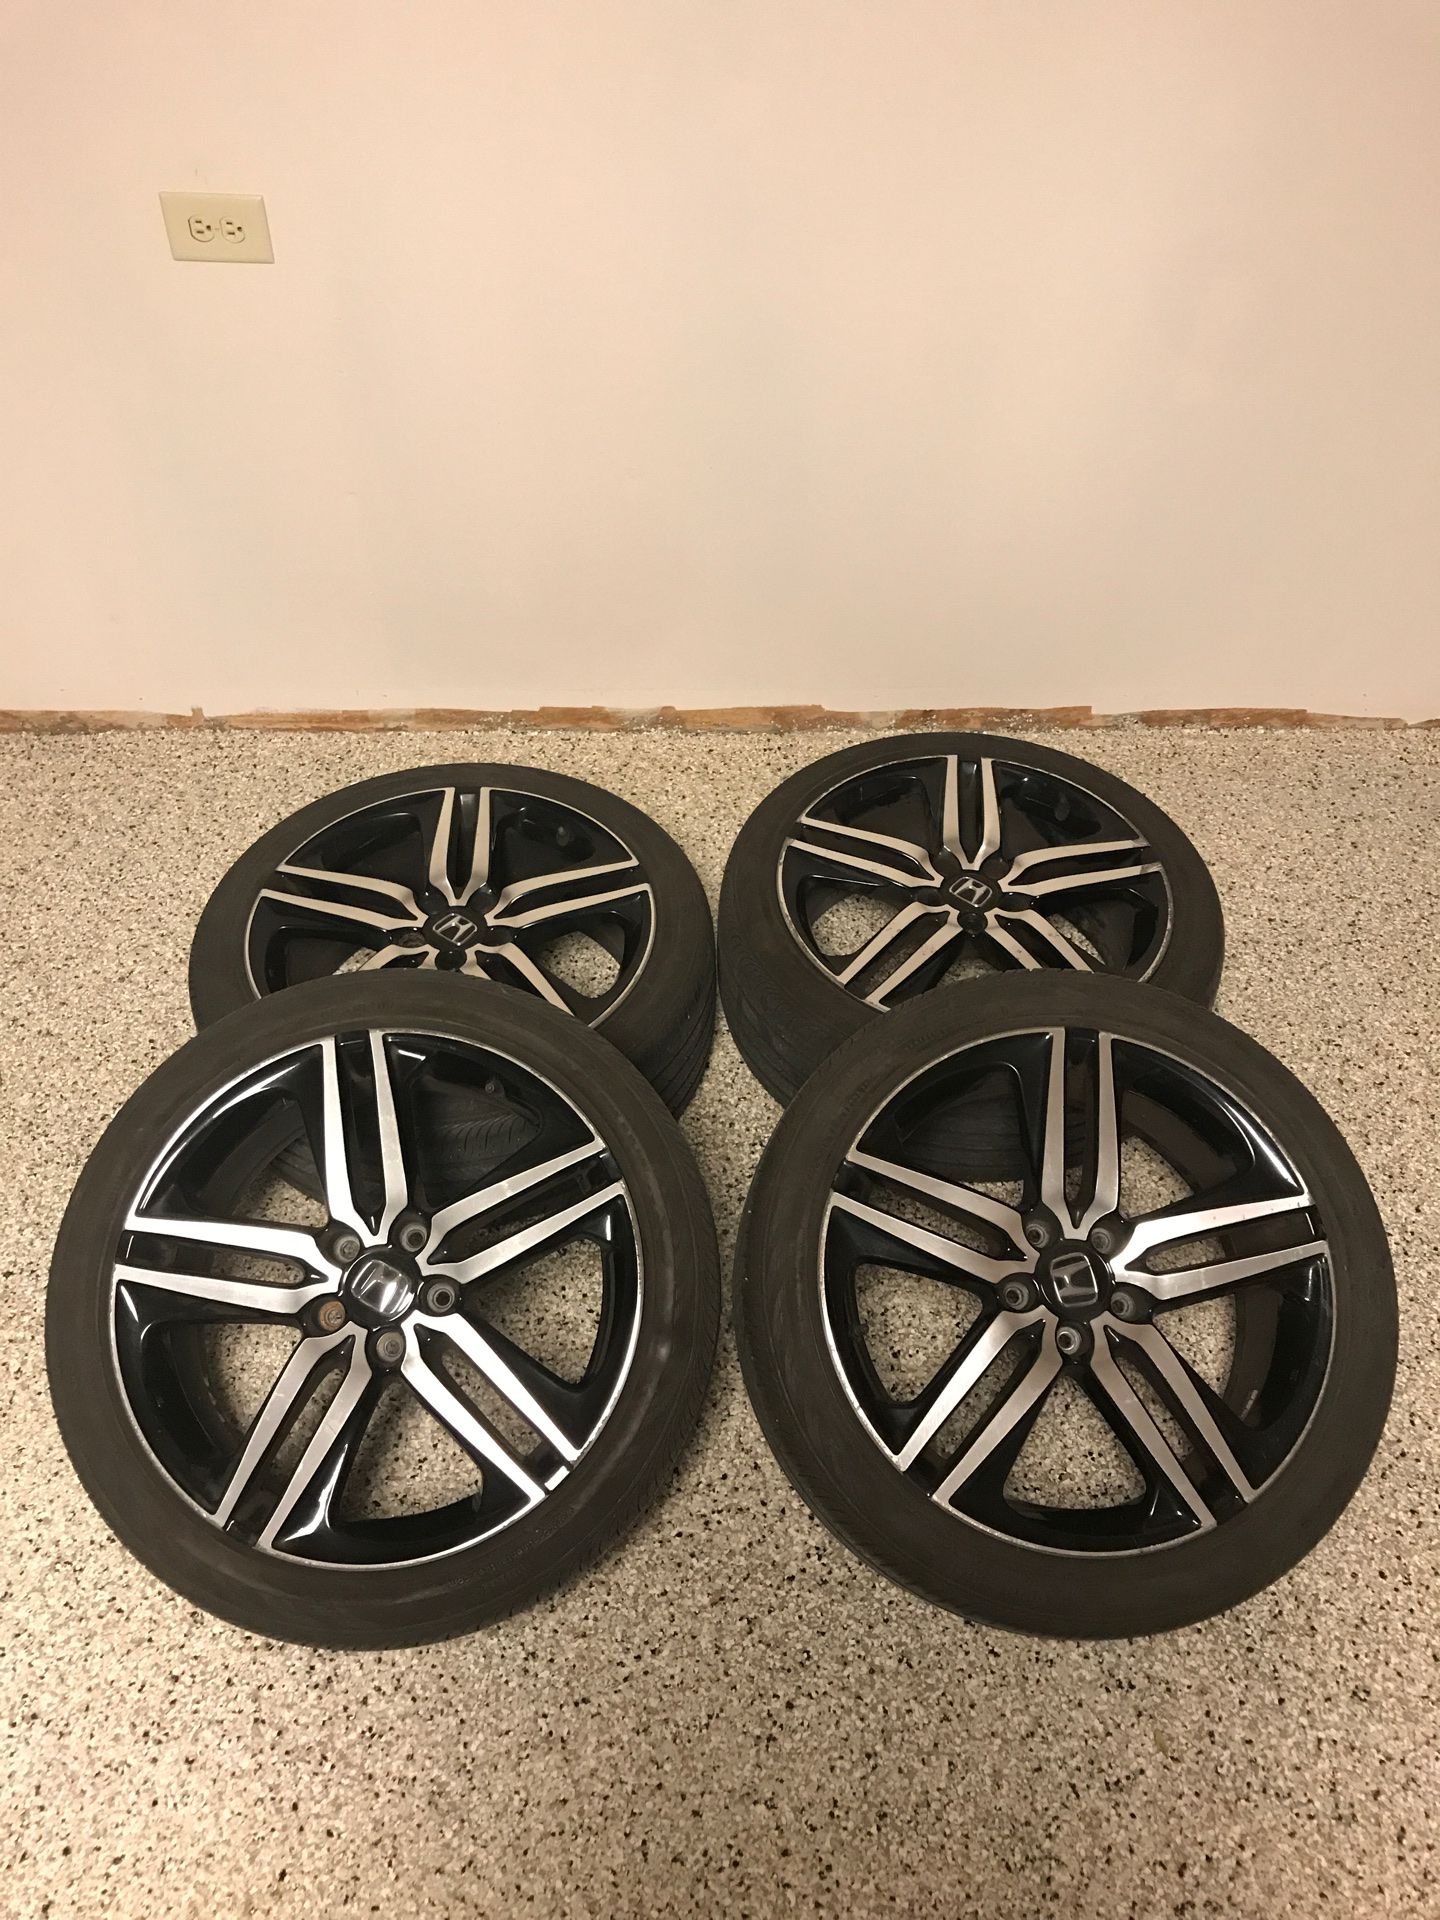 19” accord sport rims and tires